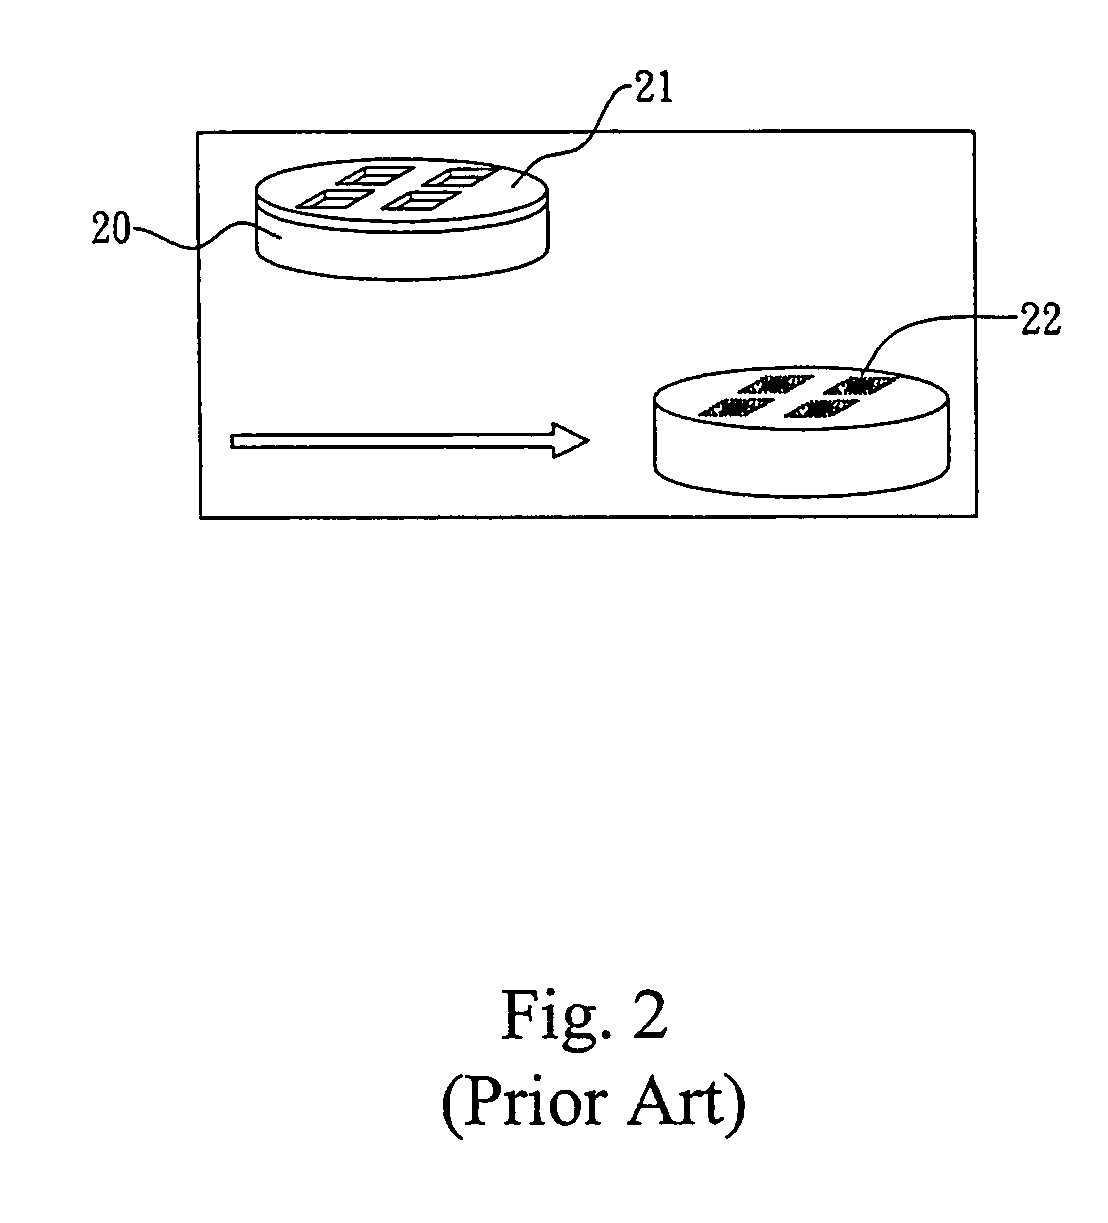 Microelectronic positioning for bioparticles